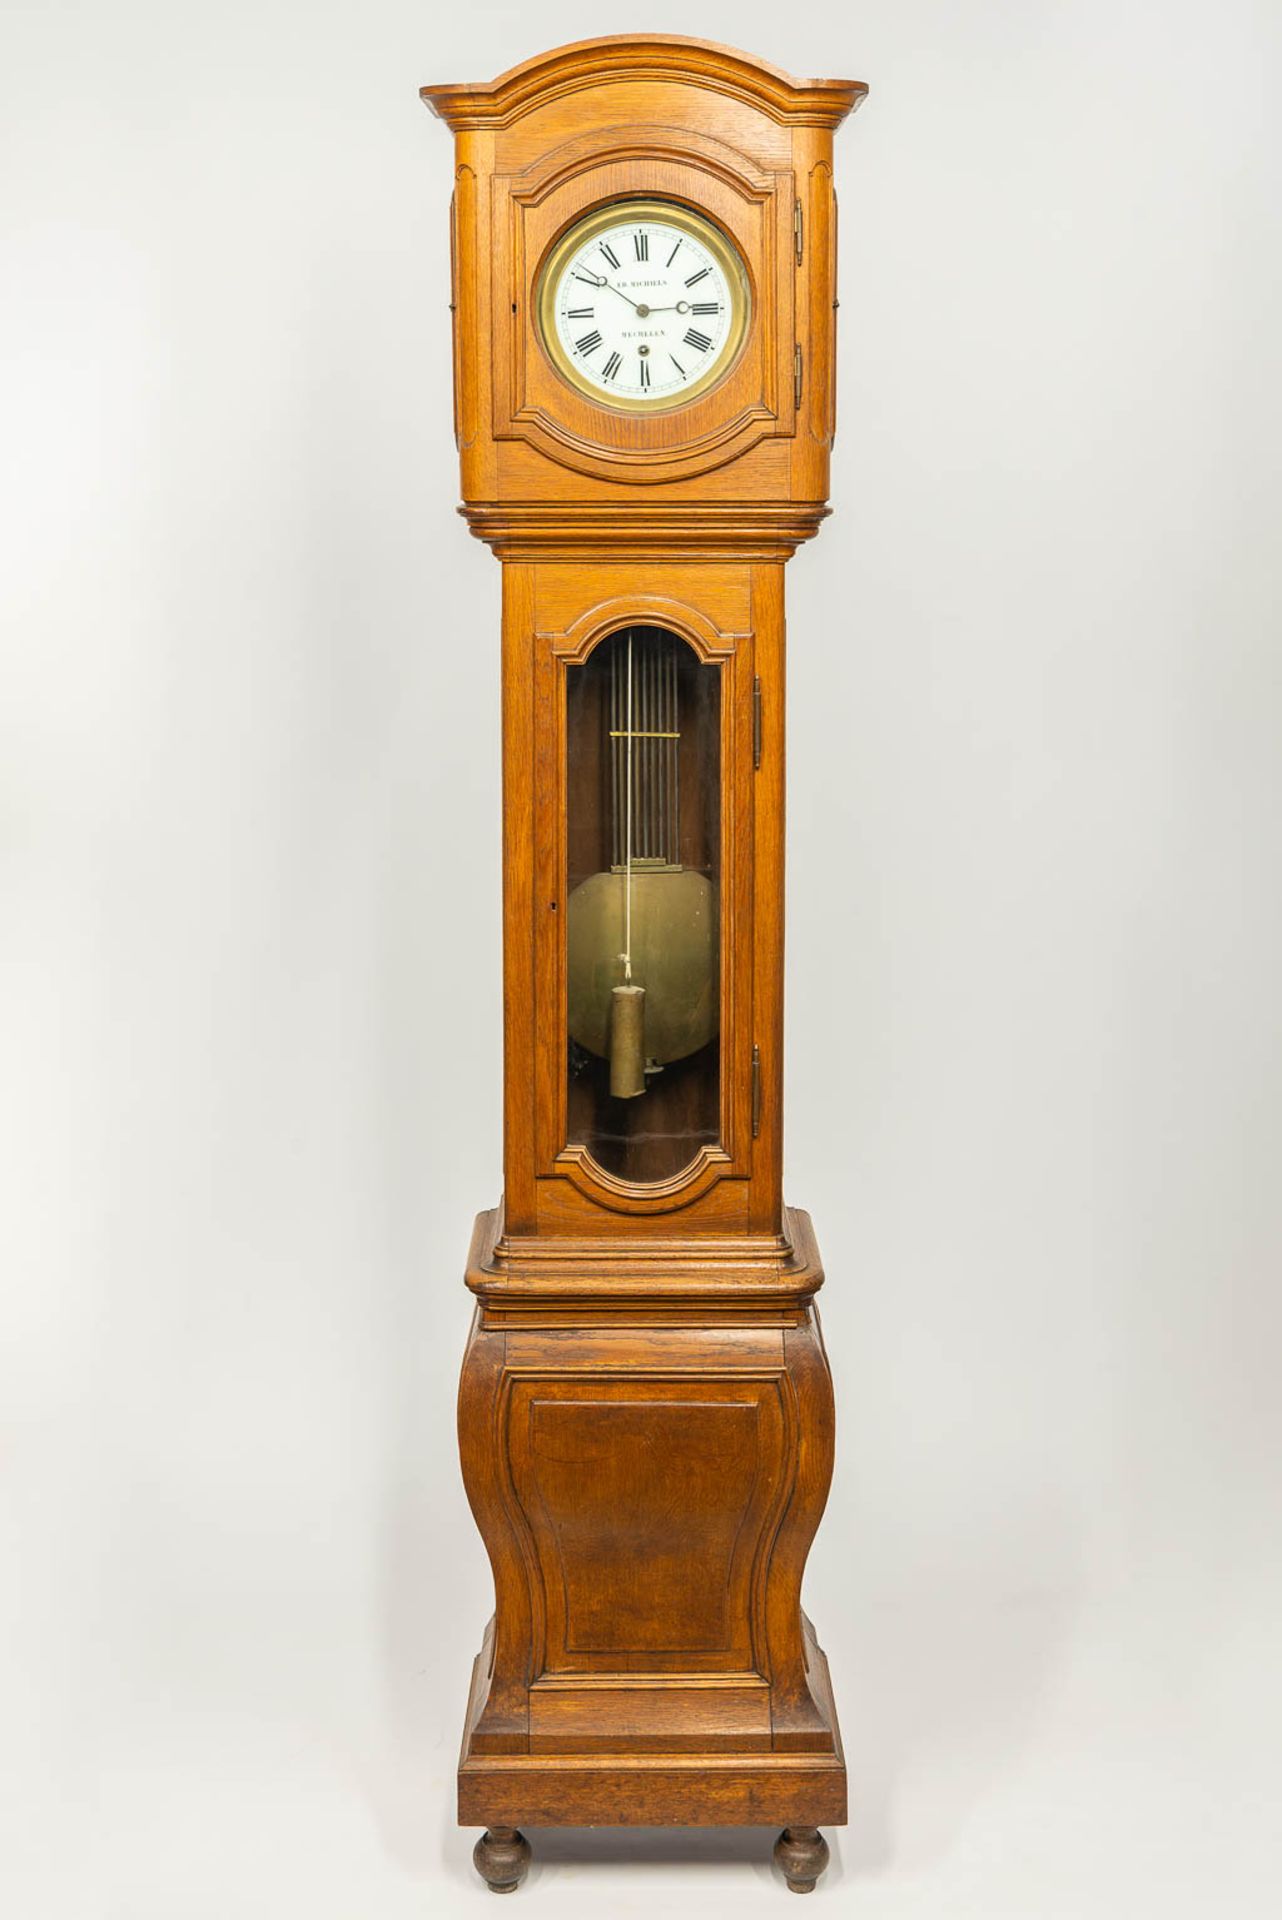 A large standing clock with compensation pendulum, 19th century. Marked Ed. Michiels Mechelen. (53 x